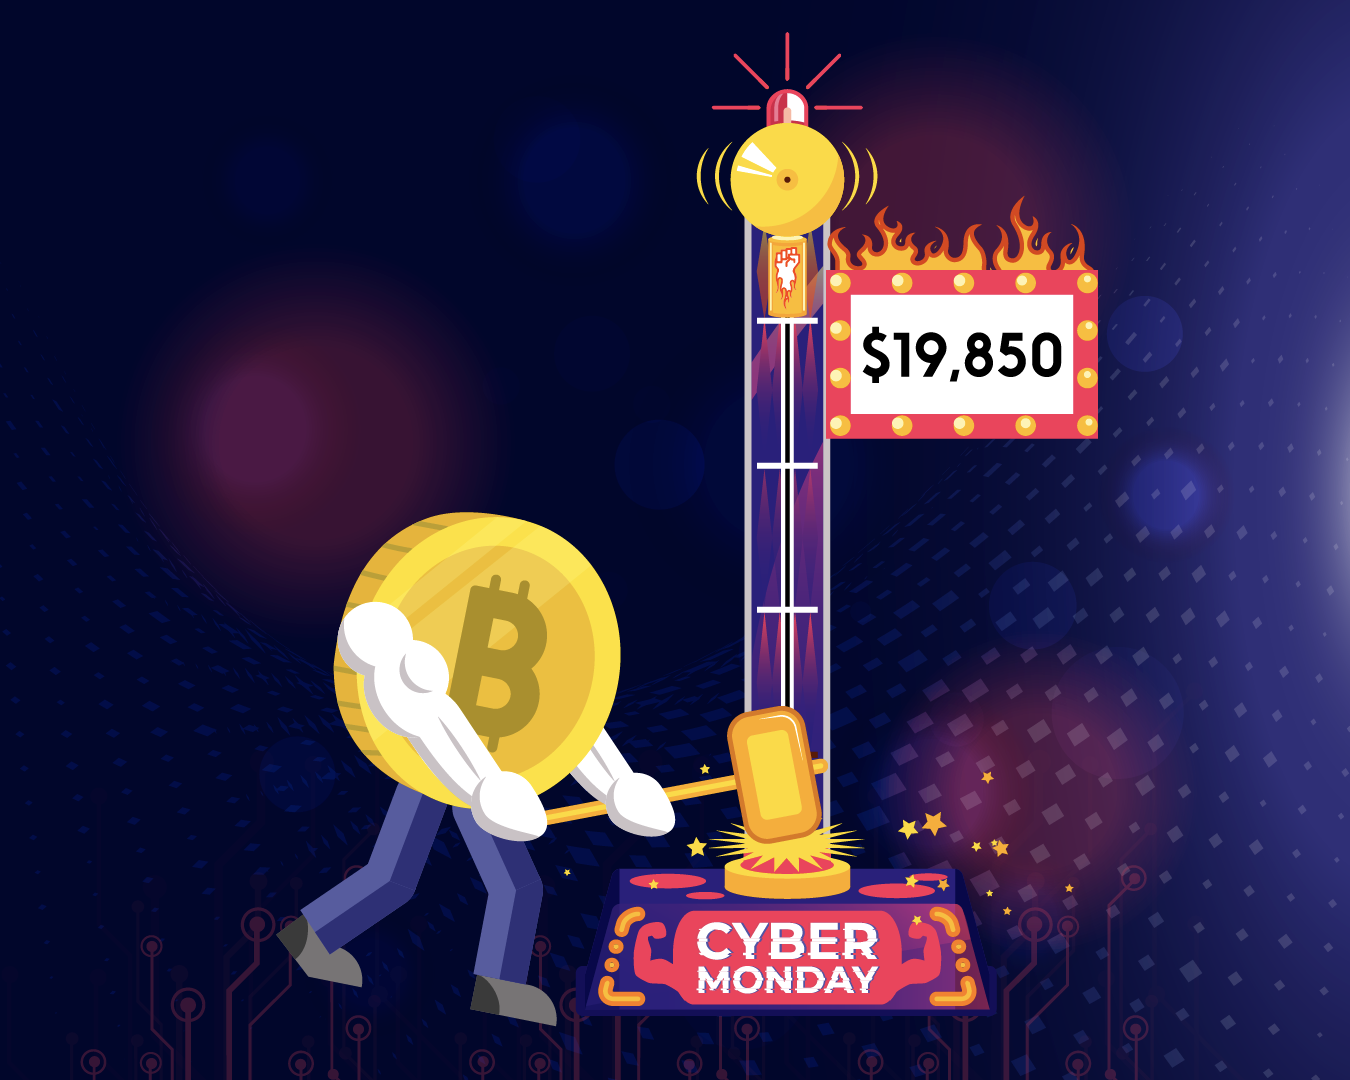 Bitcoin Price Hits A New All Time High On Cyber Monday